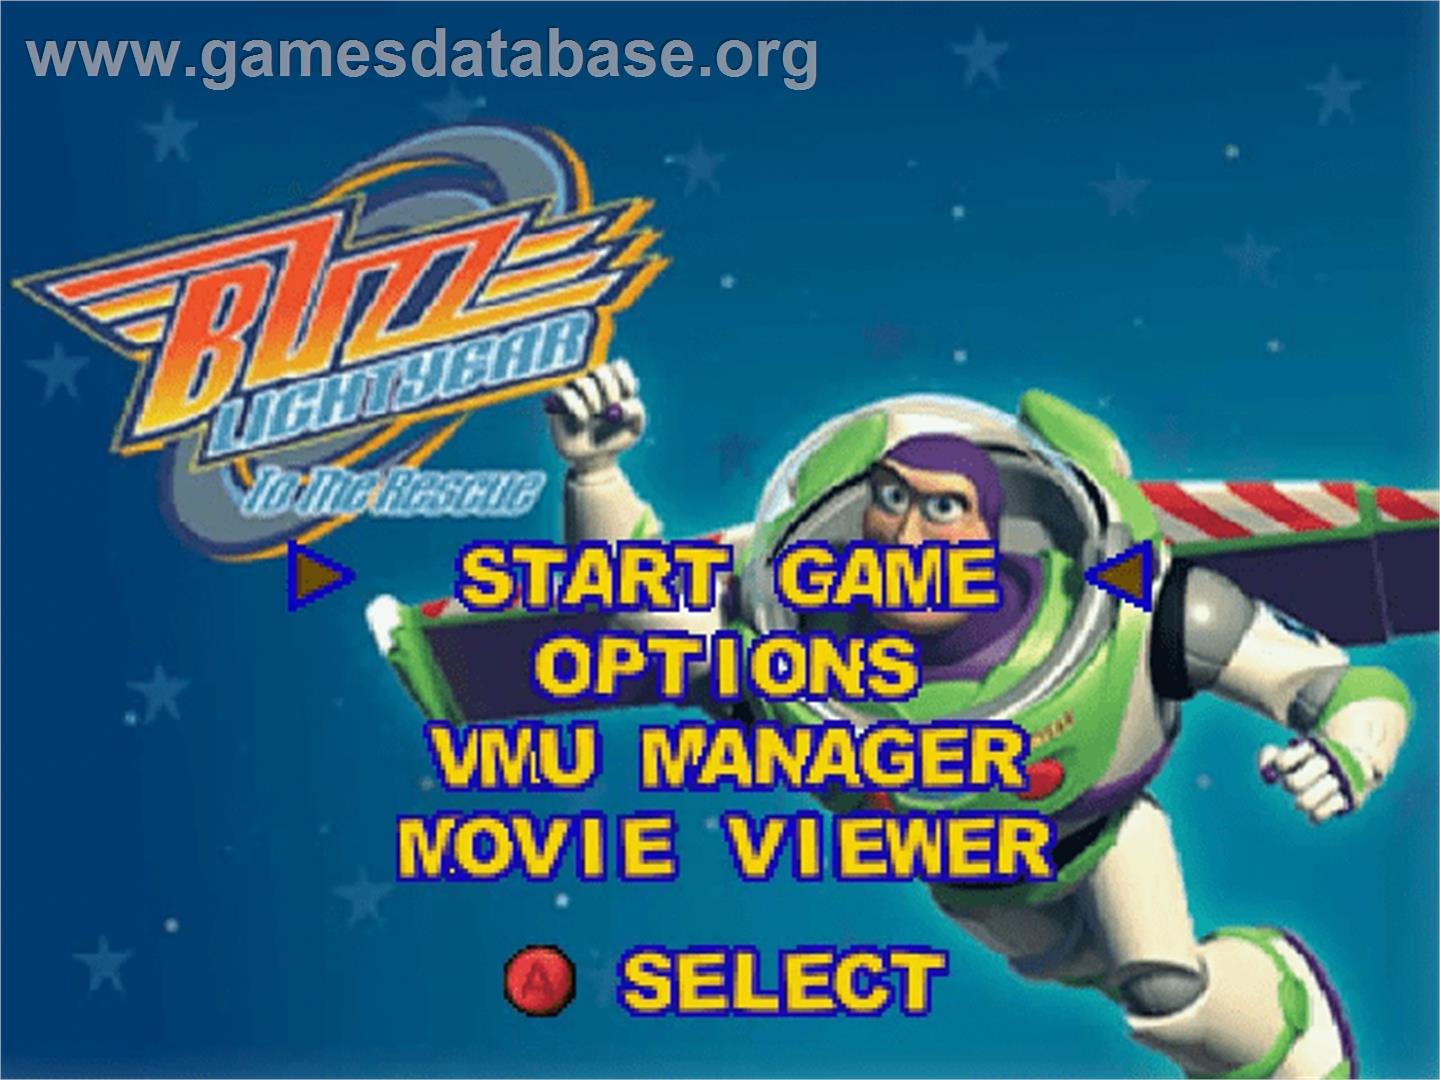 Toy Story 2: Buzz Lightyear to the Rescue - Sega Dreamcast - Artwork - Title Screen